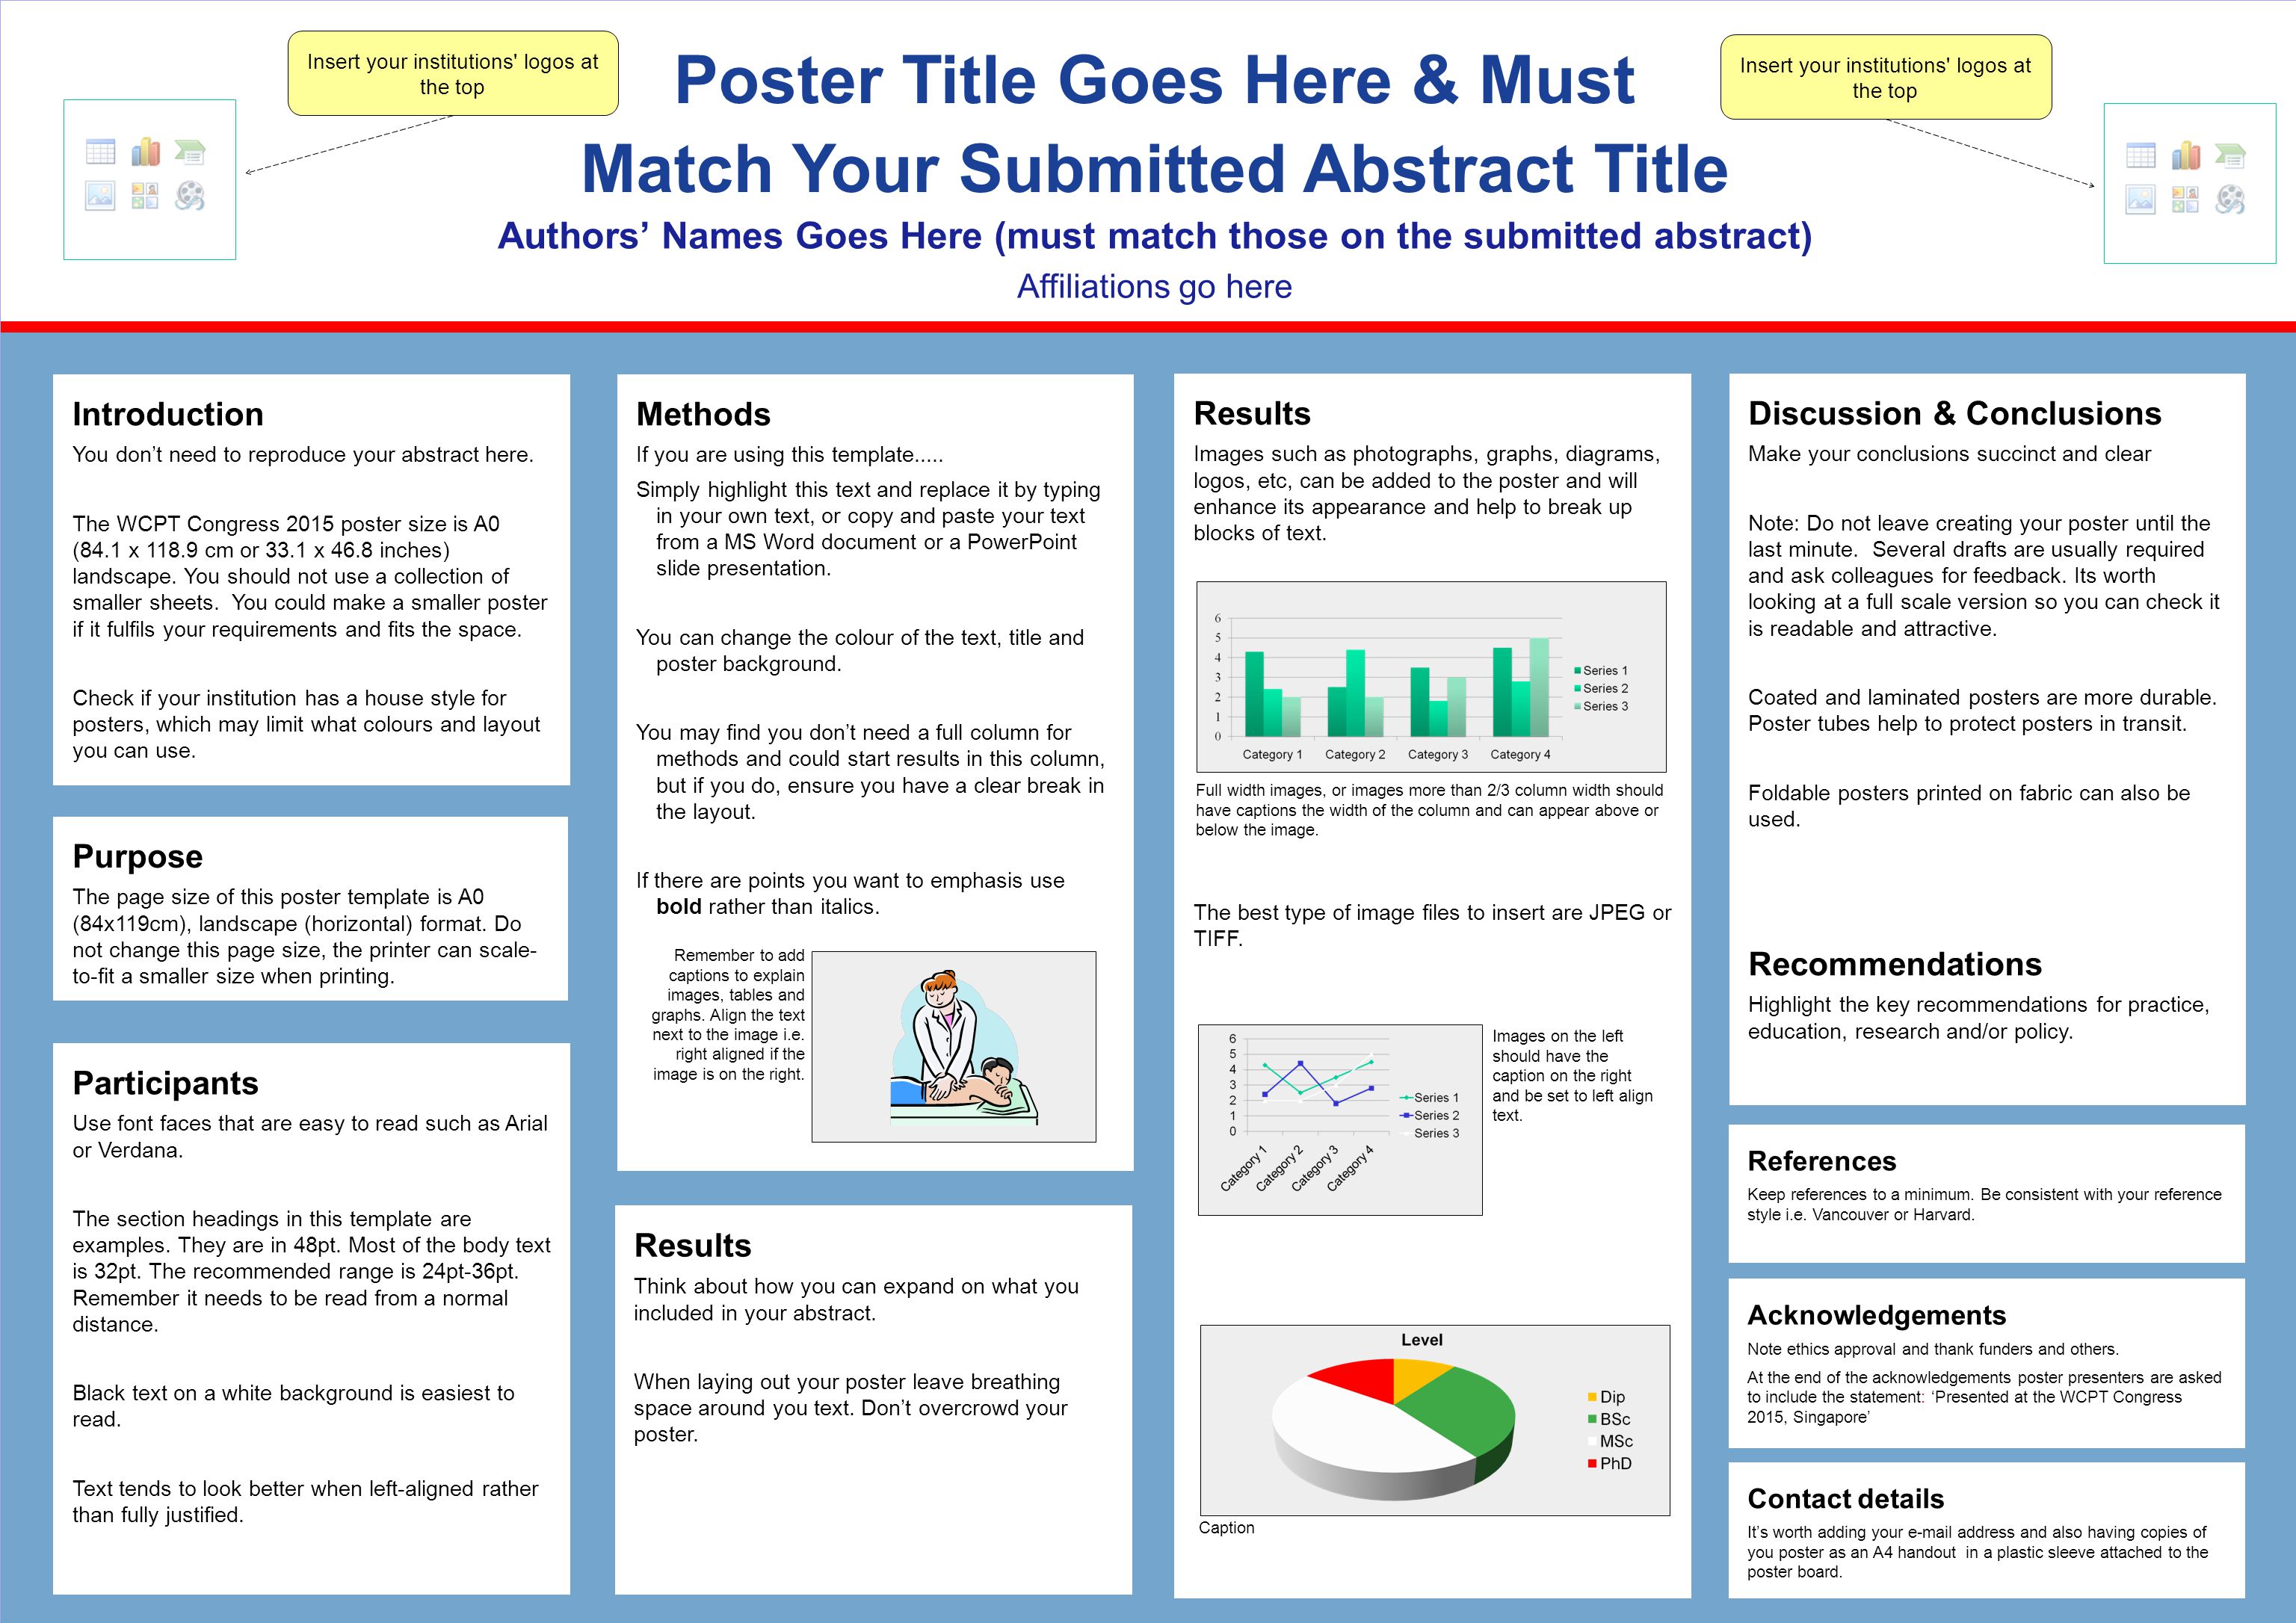 Poster Title Goes Here & Must Match Your Submitted Abstract Title Authors’ Names Goes Here (must match those on the submitted abstract) Affiliations go here Acknowledgements Note ethics approval and thank funders and others.